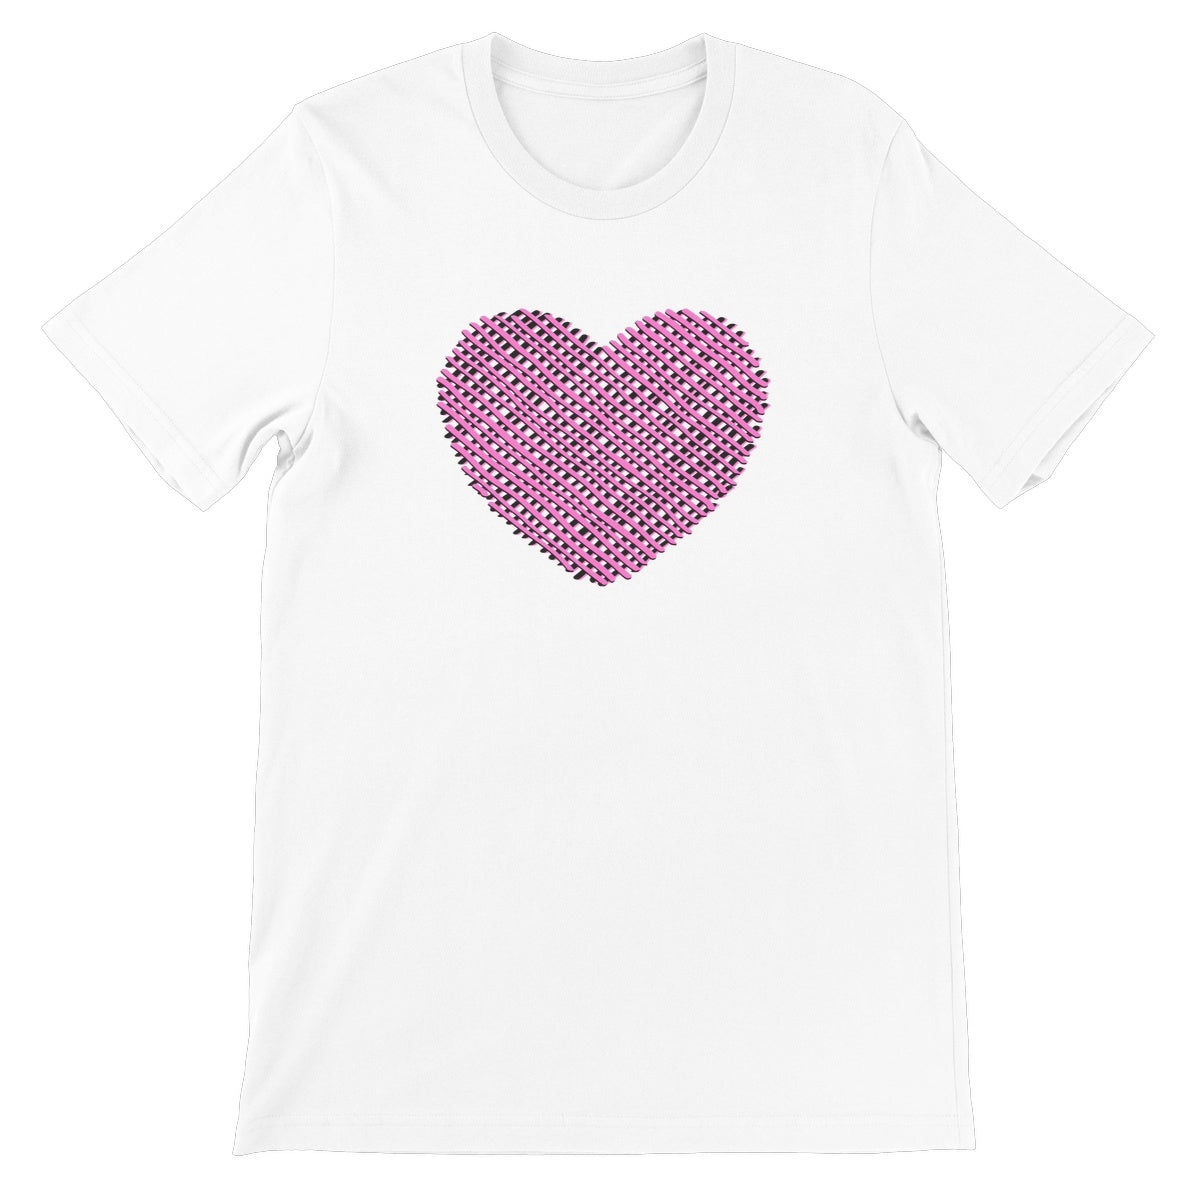 A white unisex crew neck t-shirt with a pink heart design in the centre of the chest.